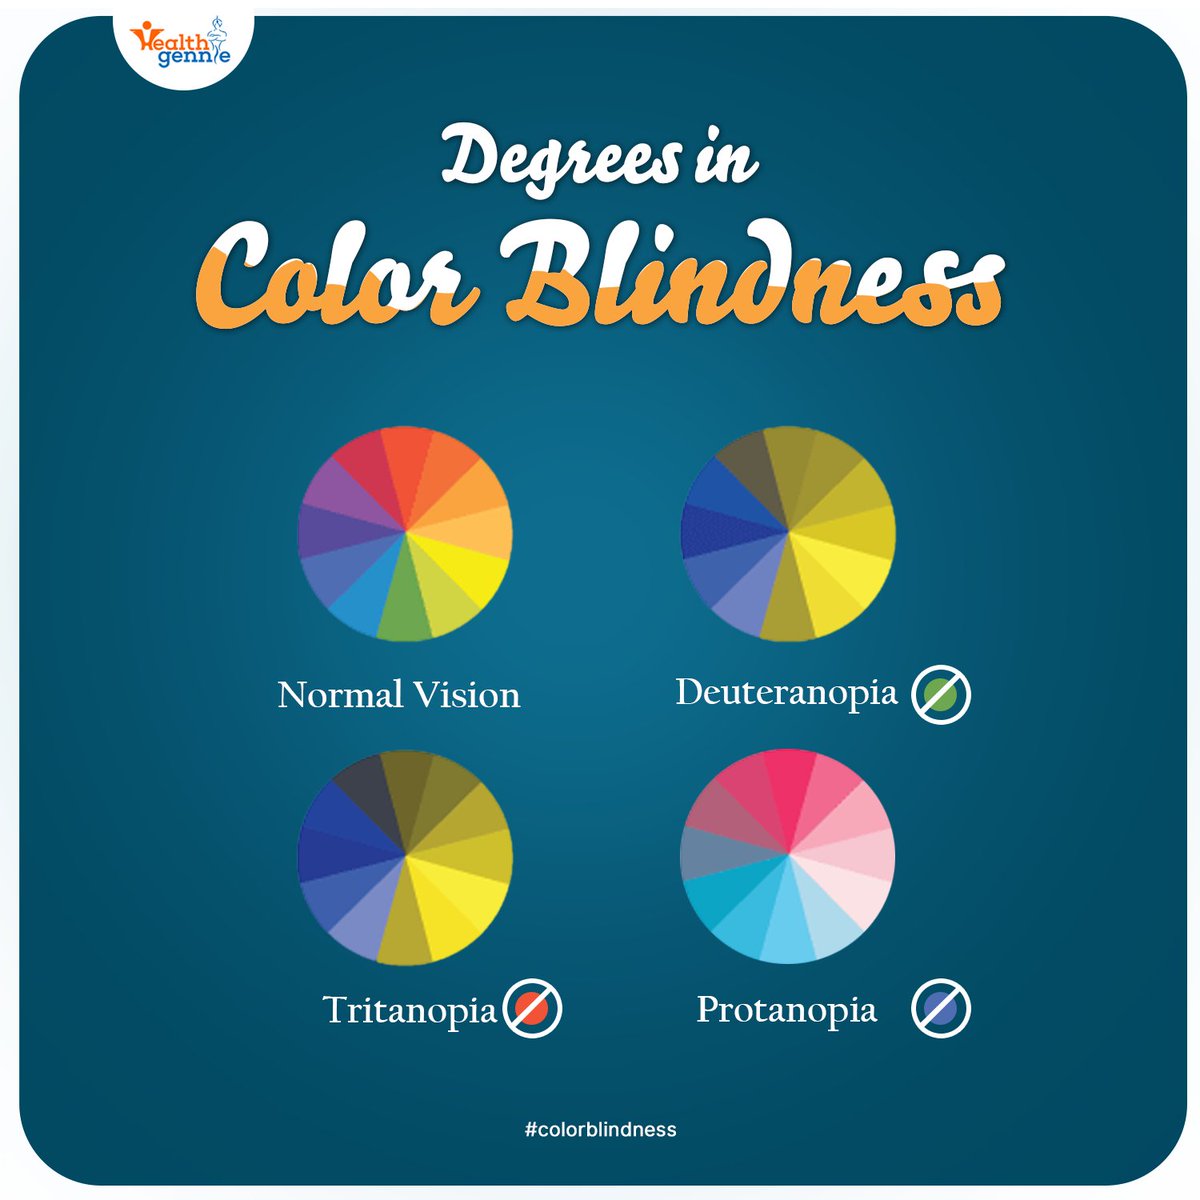 Do you confuse red color green and vice-versa? The condition where you can't tell the difference between certain colors is called Color Blindness.
#PreventionOfBlindnessWeek #EyeCare #Vision #Blindness #Cataract #HealthyLife #Healthgennie